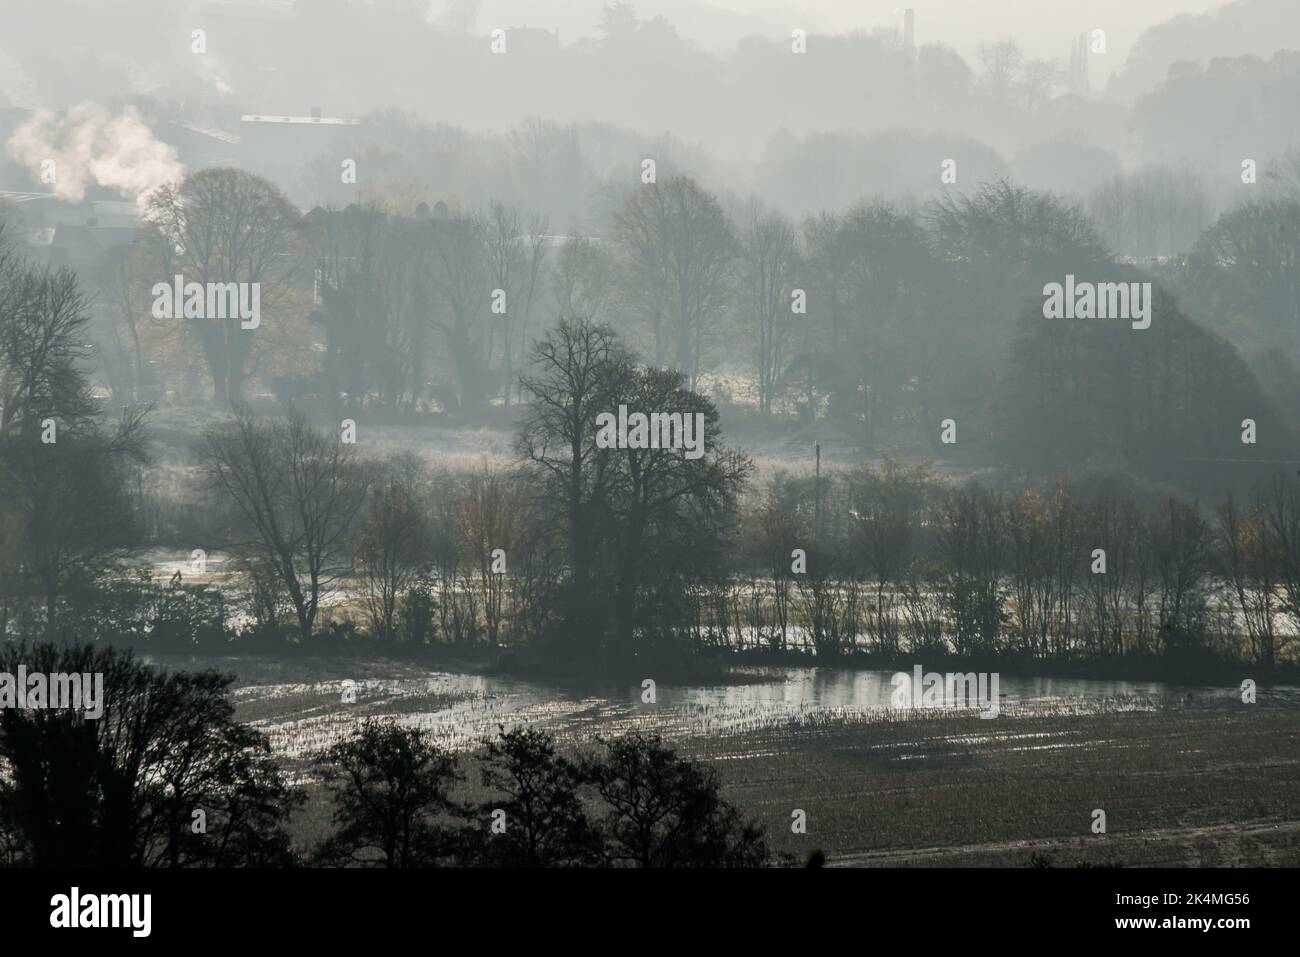 Morning mist and waterlogged fields in the Derwent Valley at Belper, Derbyshire after a flood Stock Photo